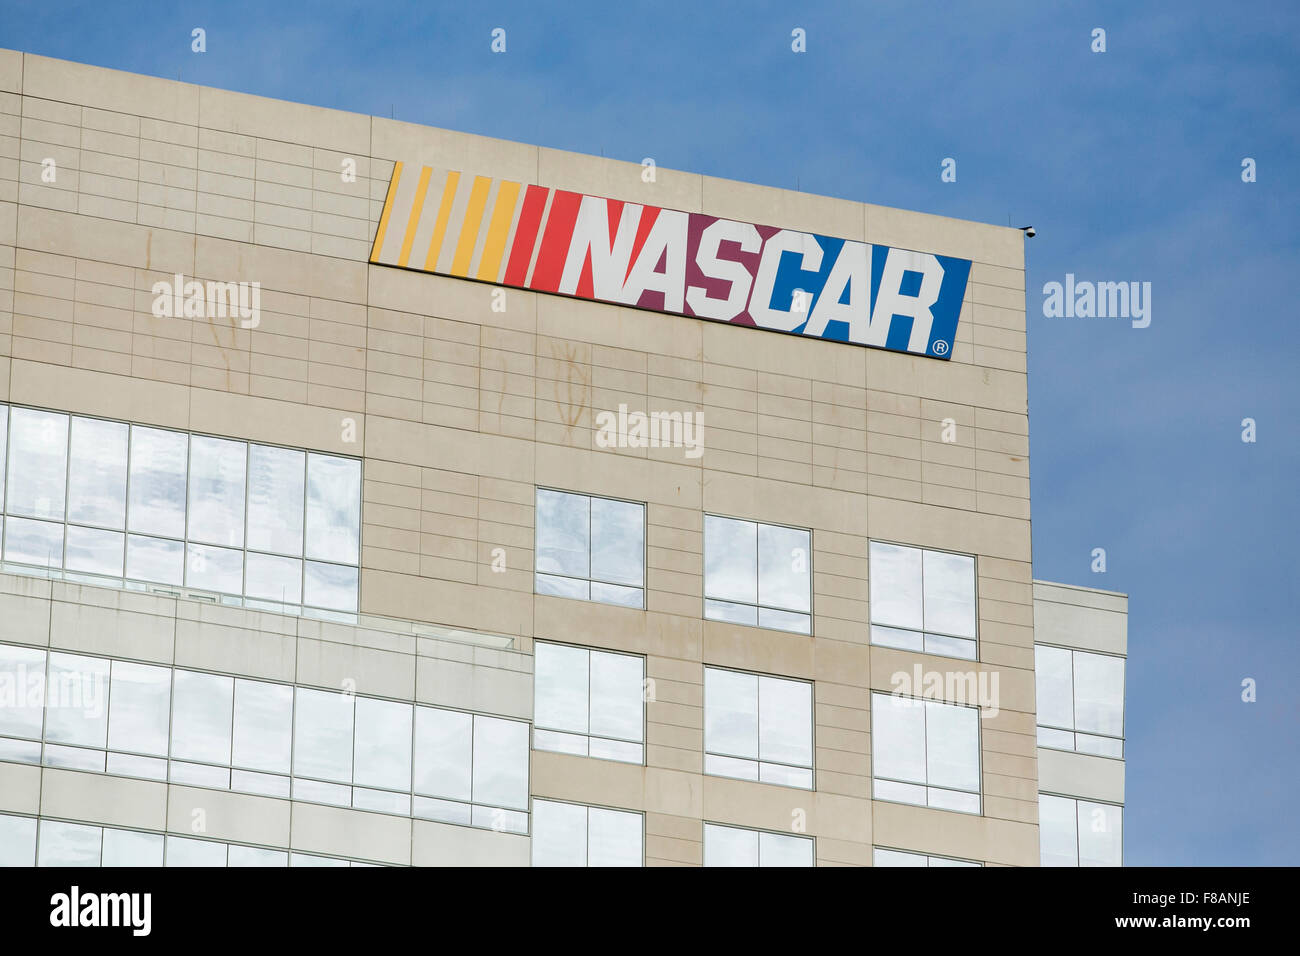 A logo sign outside of a facility occupied by the National Association for Stock Car Auto Racing (NASCAR) in Charlotte, North Ca Stock Photo